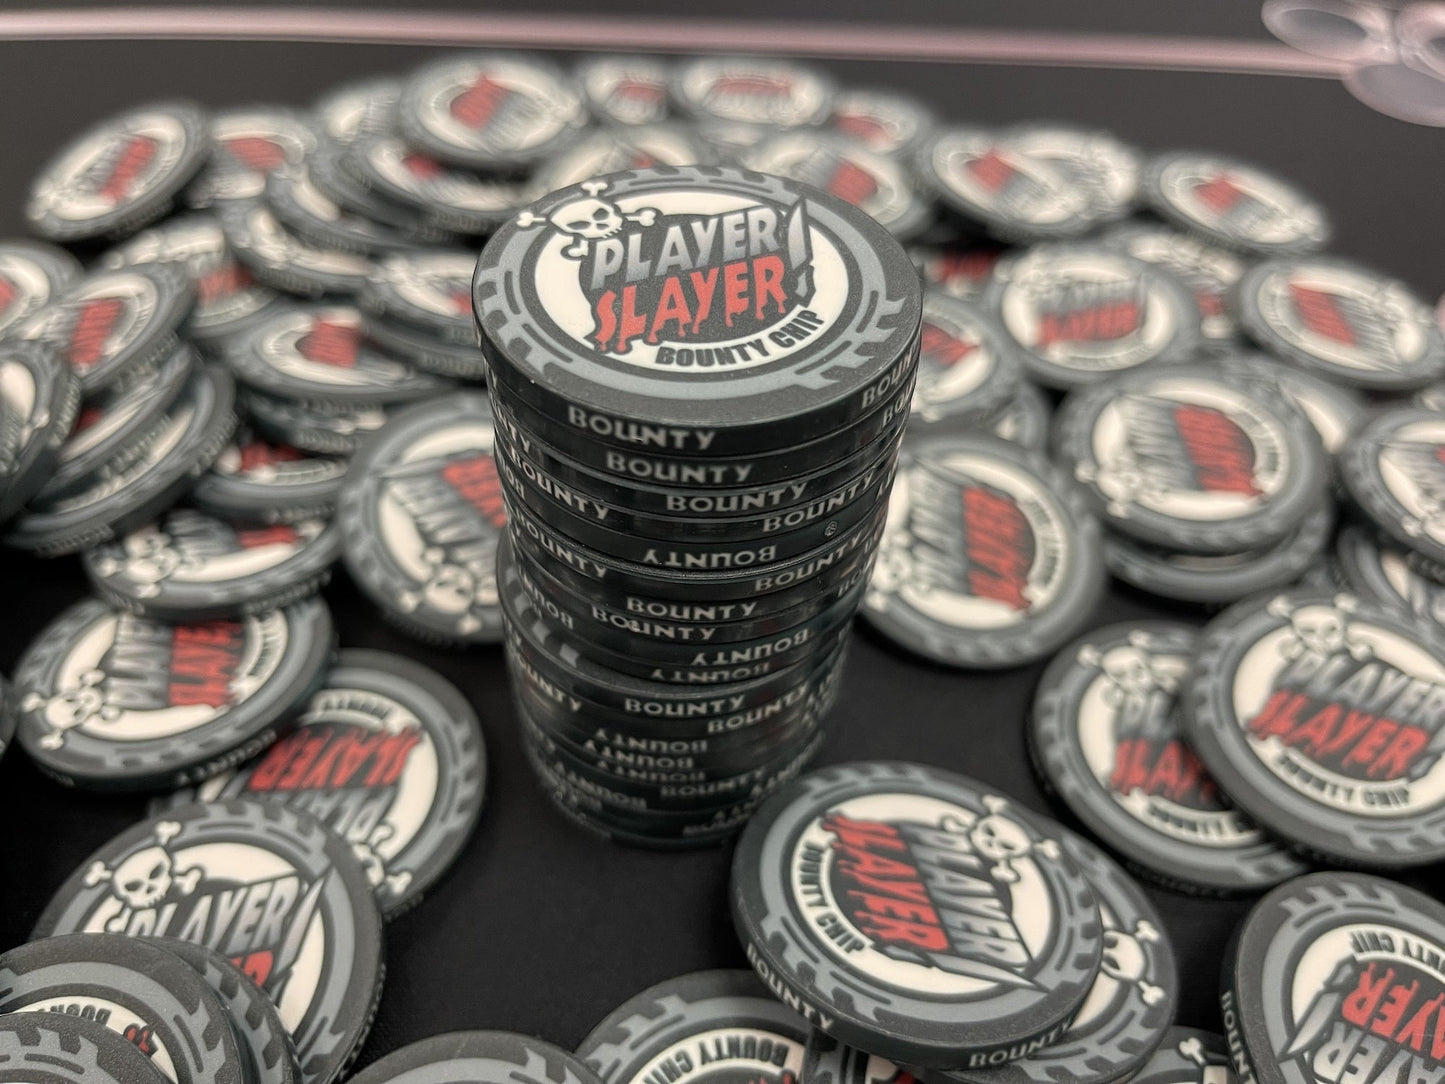 A 20-chip stack of Player Slayer bounties, surrounded by a pot of black bounty chips. These masculine poker chips are designed to be a fun, easily recognizable addition to your bounty poker tournament. They even match most chips from other poker equipment shops.